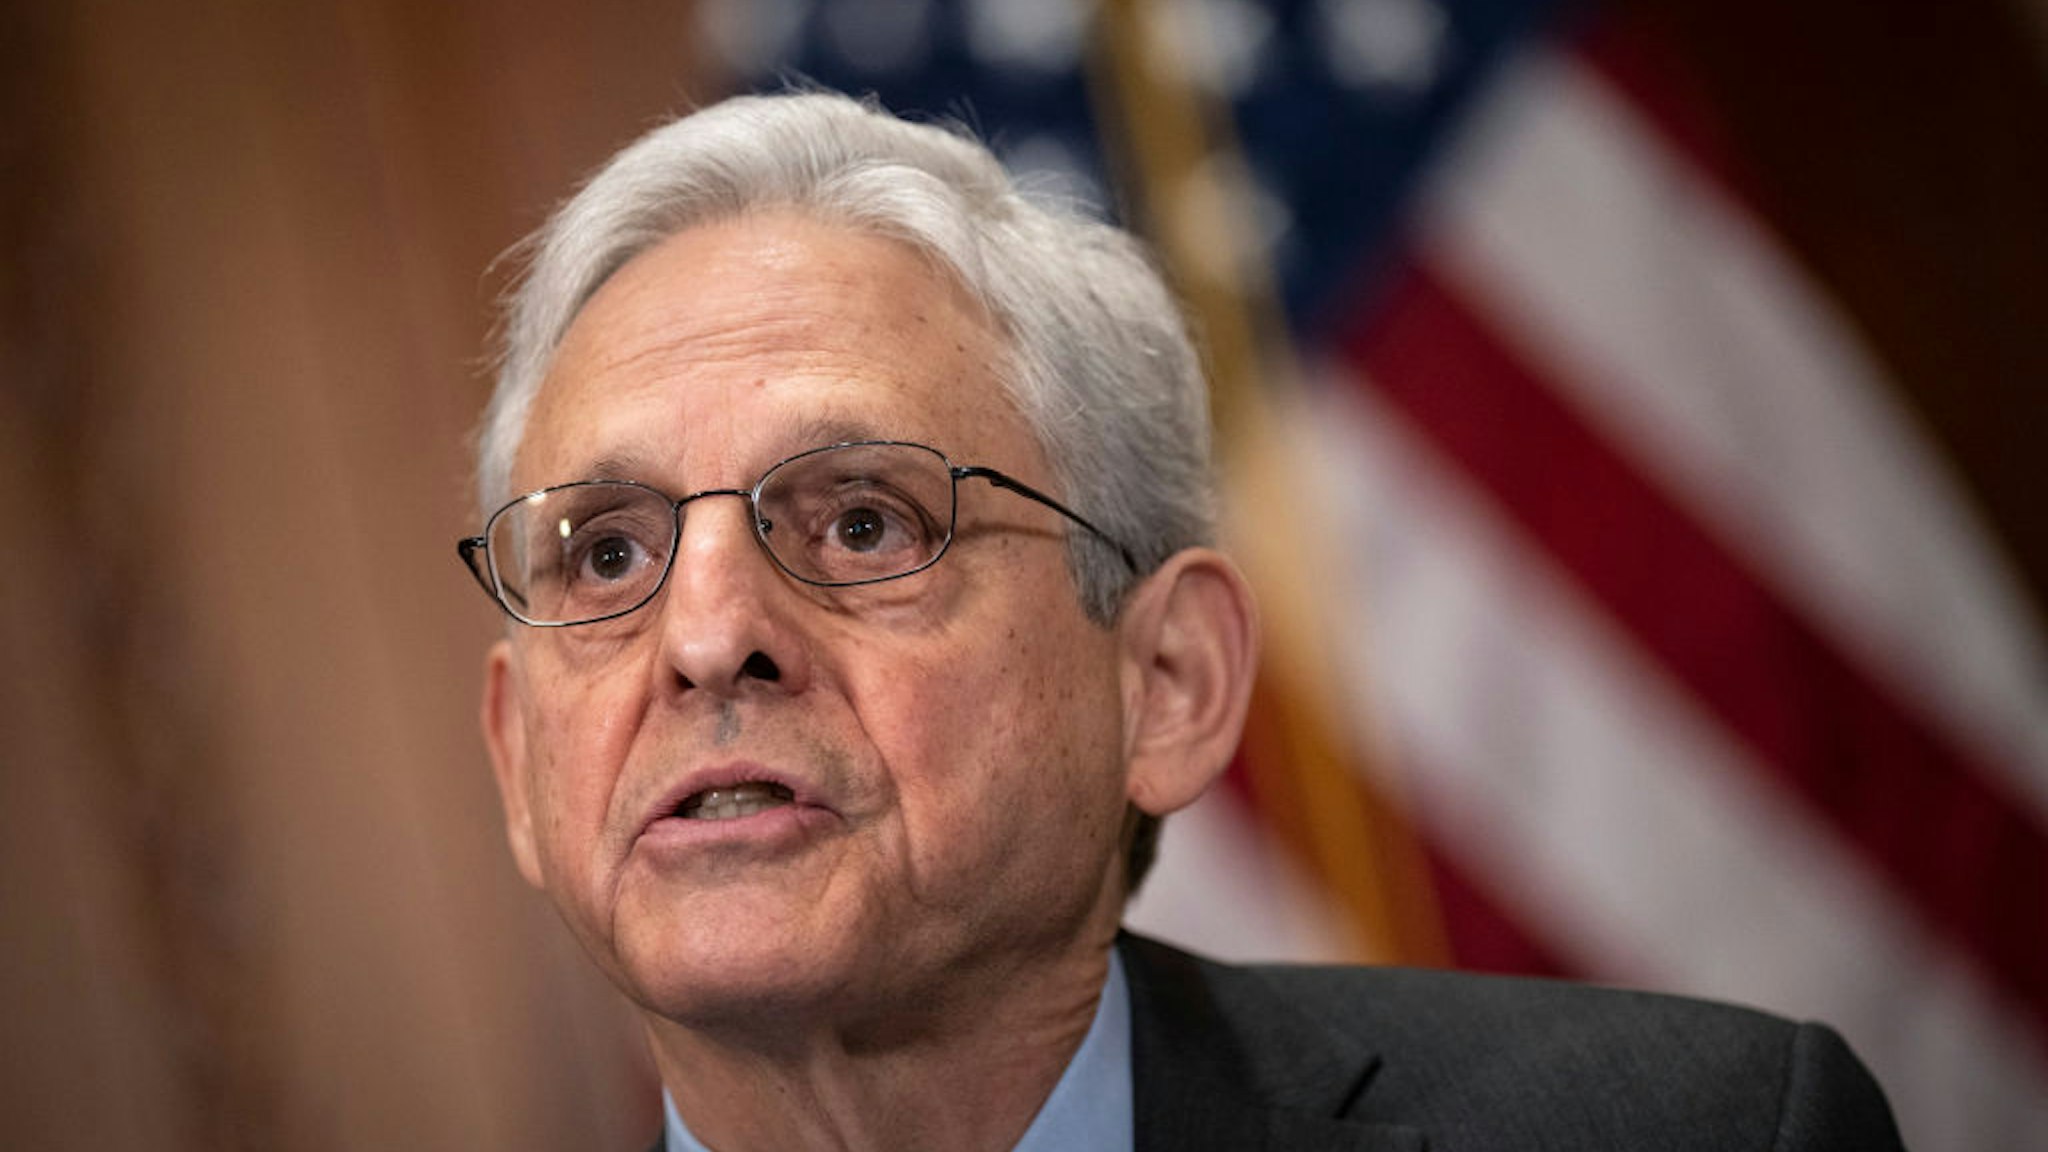 WASHINGTON, DC - APRIL 17: U.S. Attorney General Merrick Garland speaks during a meeting with Ukrainian Prosecutor General Andriy Kostin at the U.S. Department of Justice headquarters April 17, 2023 in Washington, DC. The two sides said they are discussing efforts to hold accountable those committing war crimes in Russia's invasion of Ukraine.